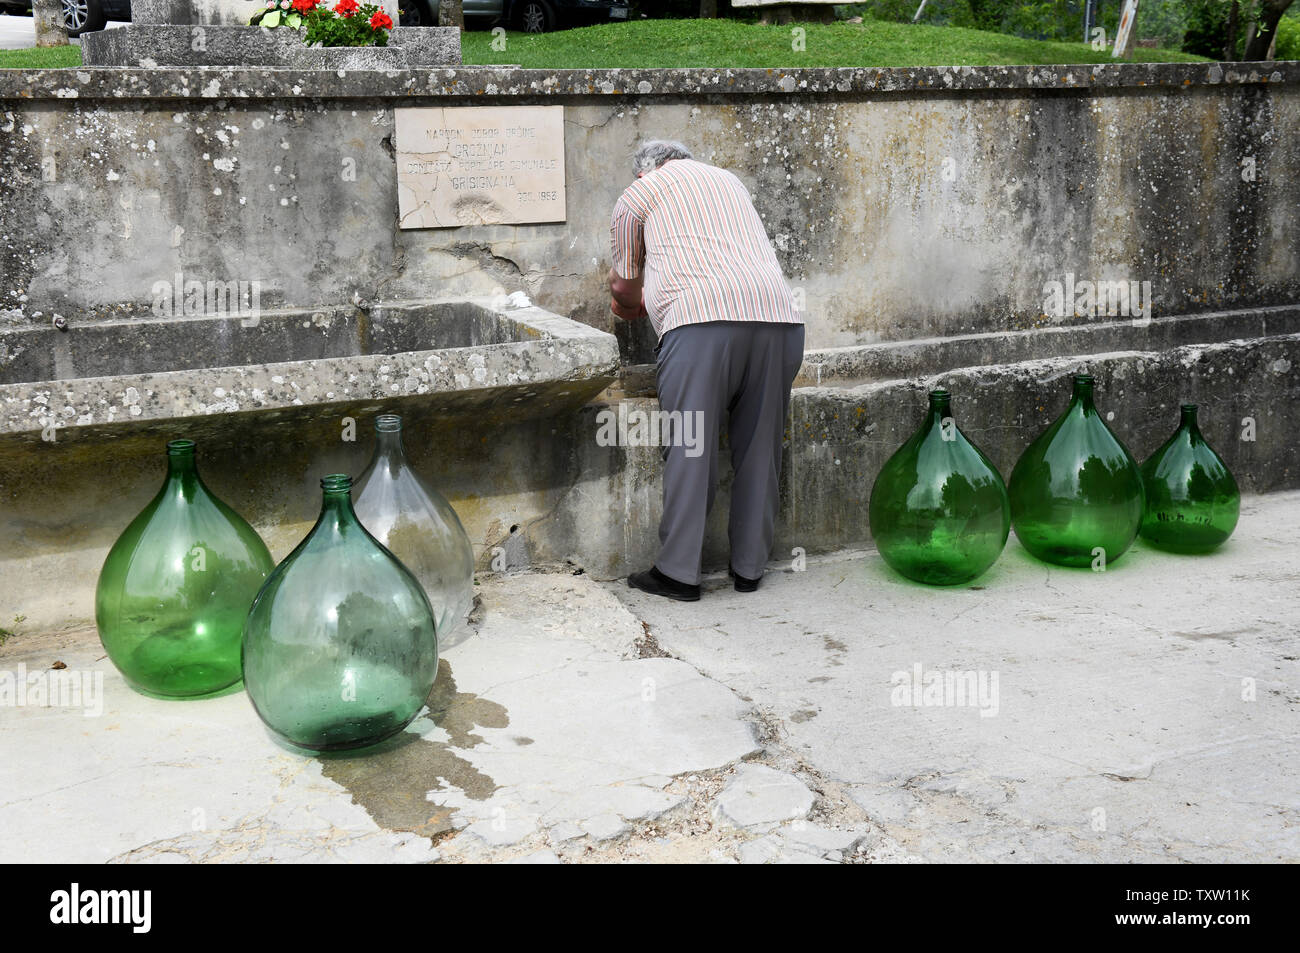 Washing cleaning large green glass distillery bottles Groznjan the hilltop village famous for it's truffles in Istria, Croatia Stock Photo